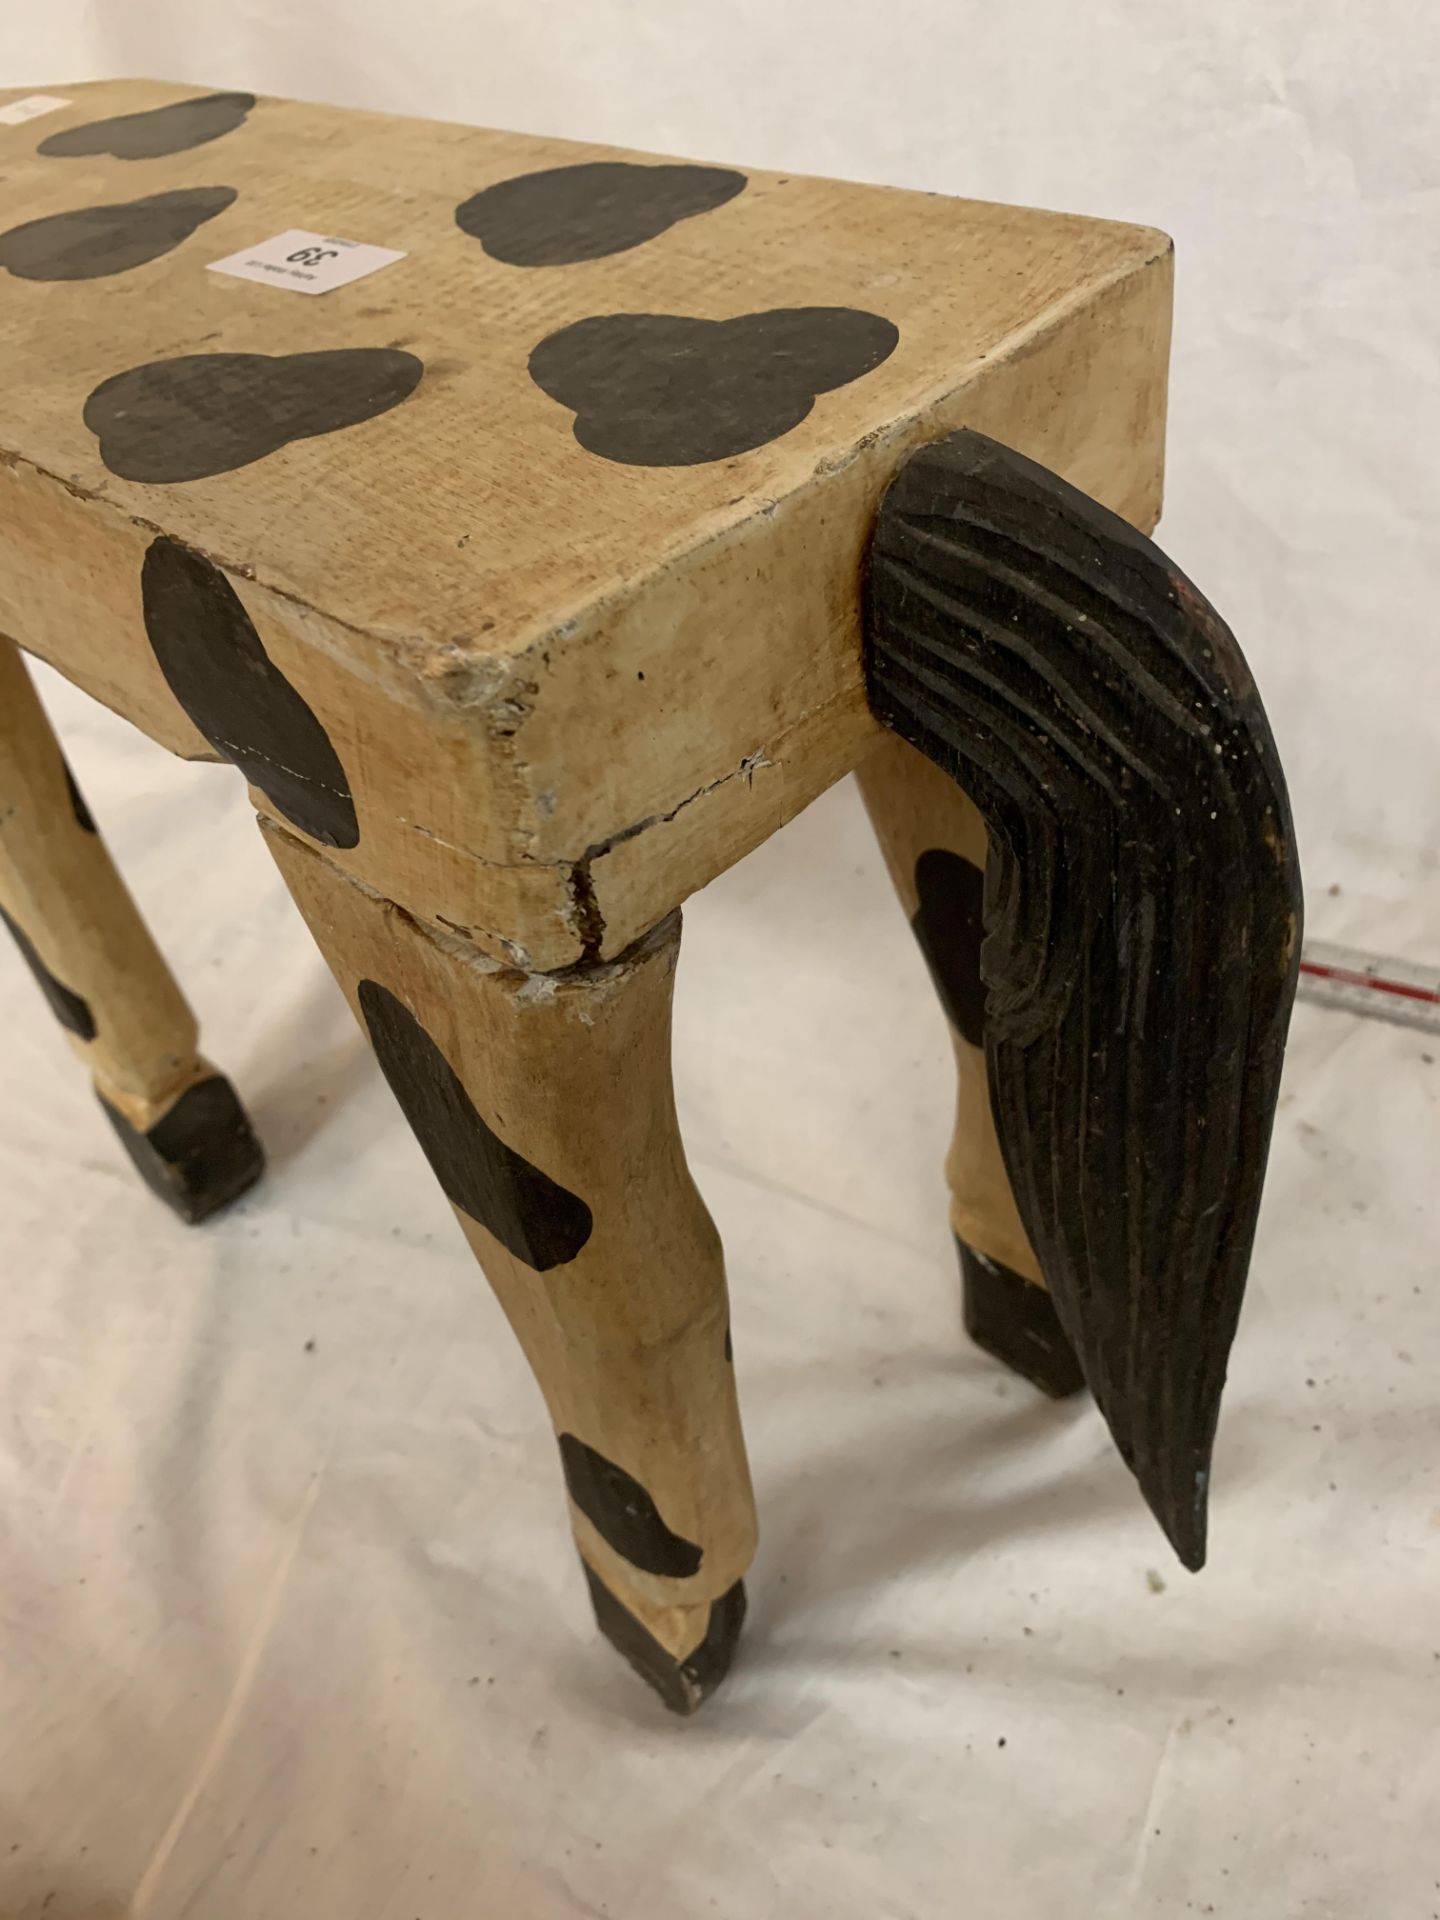 A WOODEN STOOL IN THE FORM OF A HORSE PAINTED IN THE STYLE OF AN APPALOOSA - Image 5 of 6